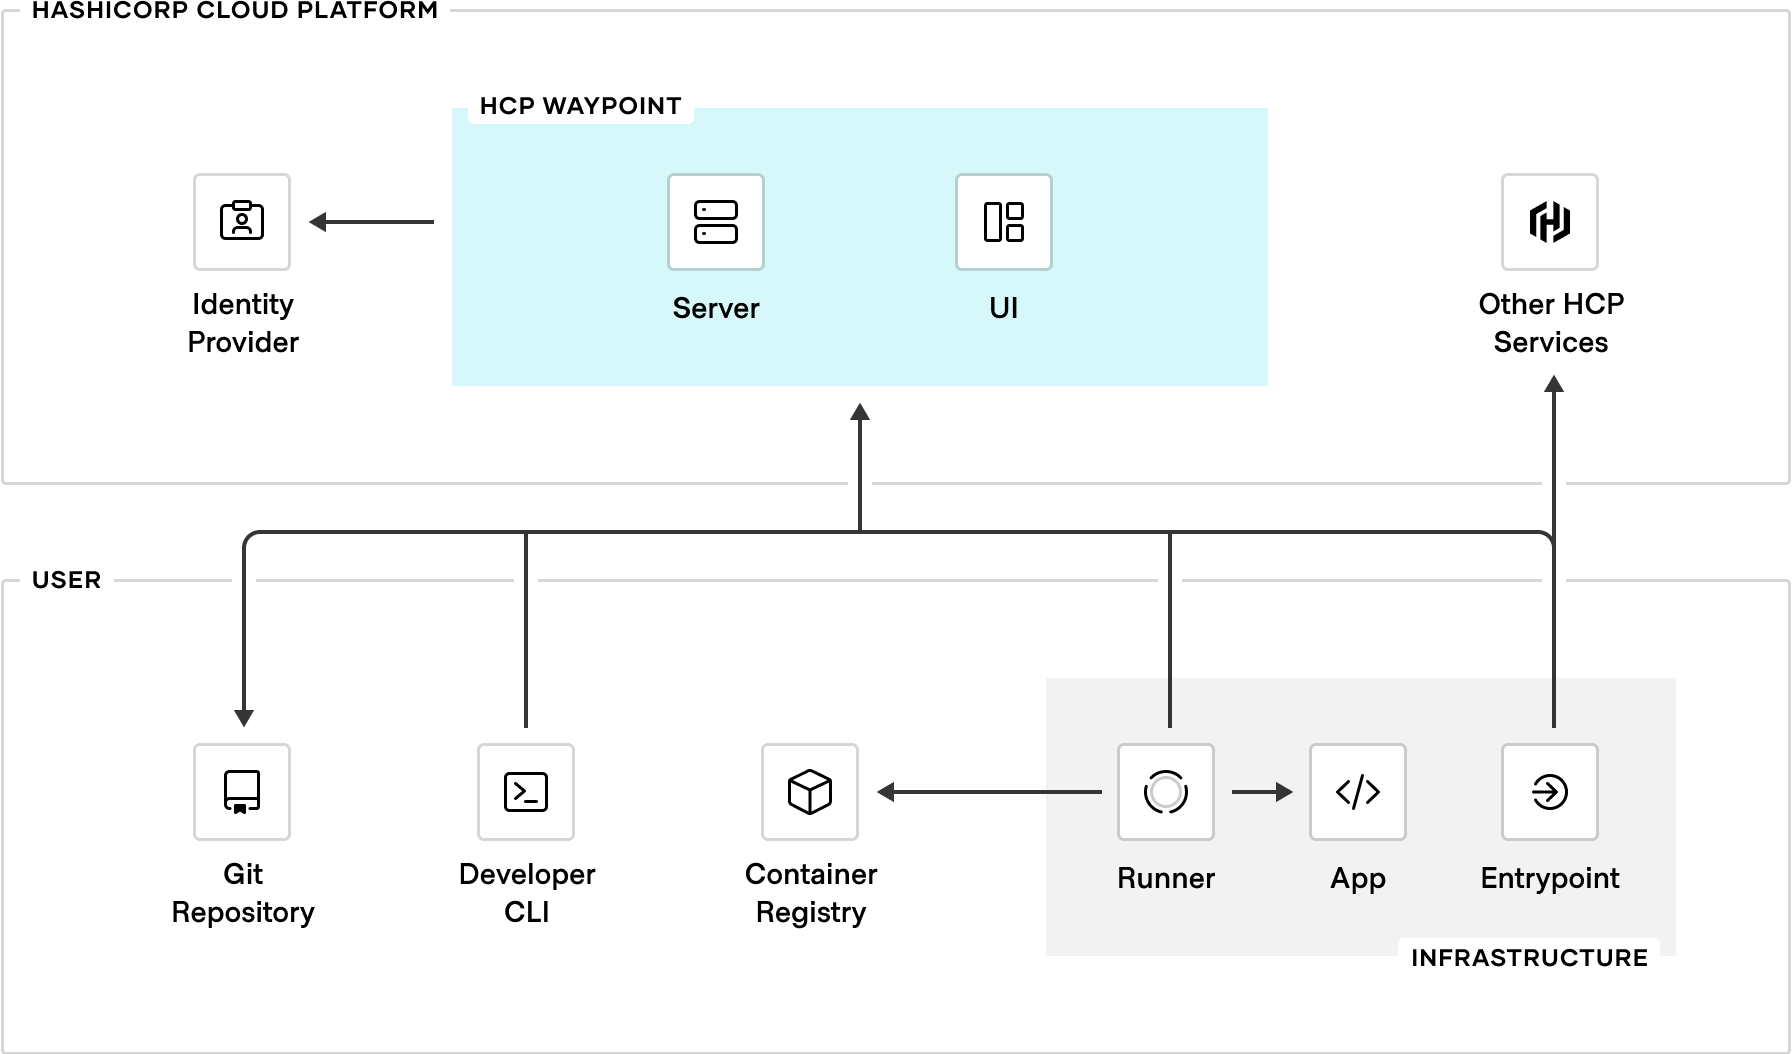 Overview of HCP Waypoint architecture and workflow